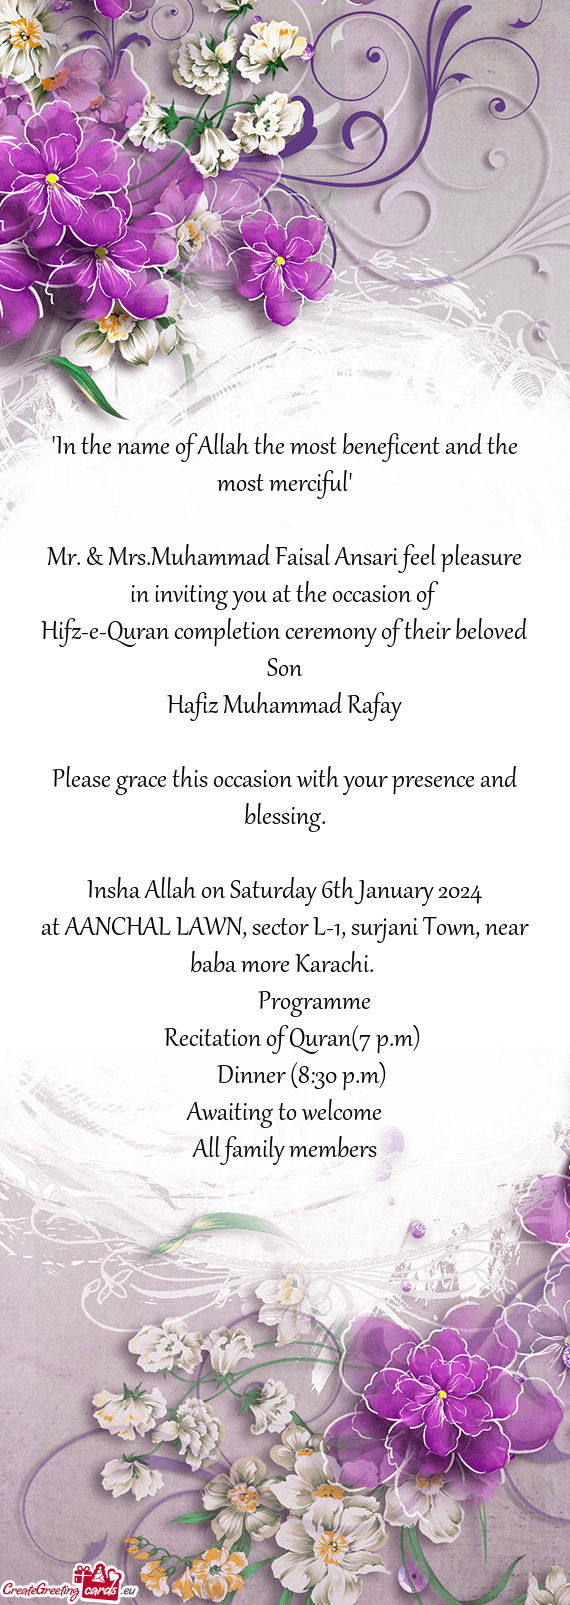 Mr. & Mrs.Muhammad Faisal Ansari feel pleasure in inviting you at the occasion of